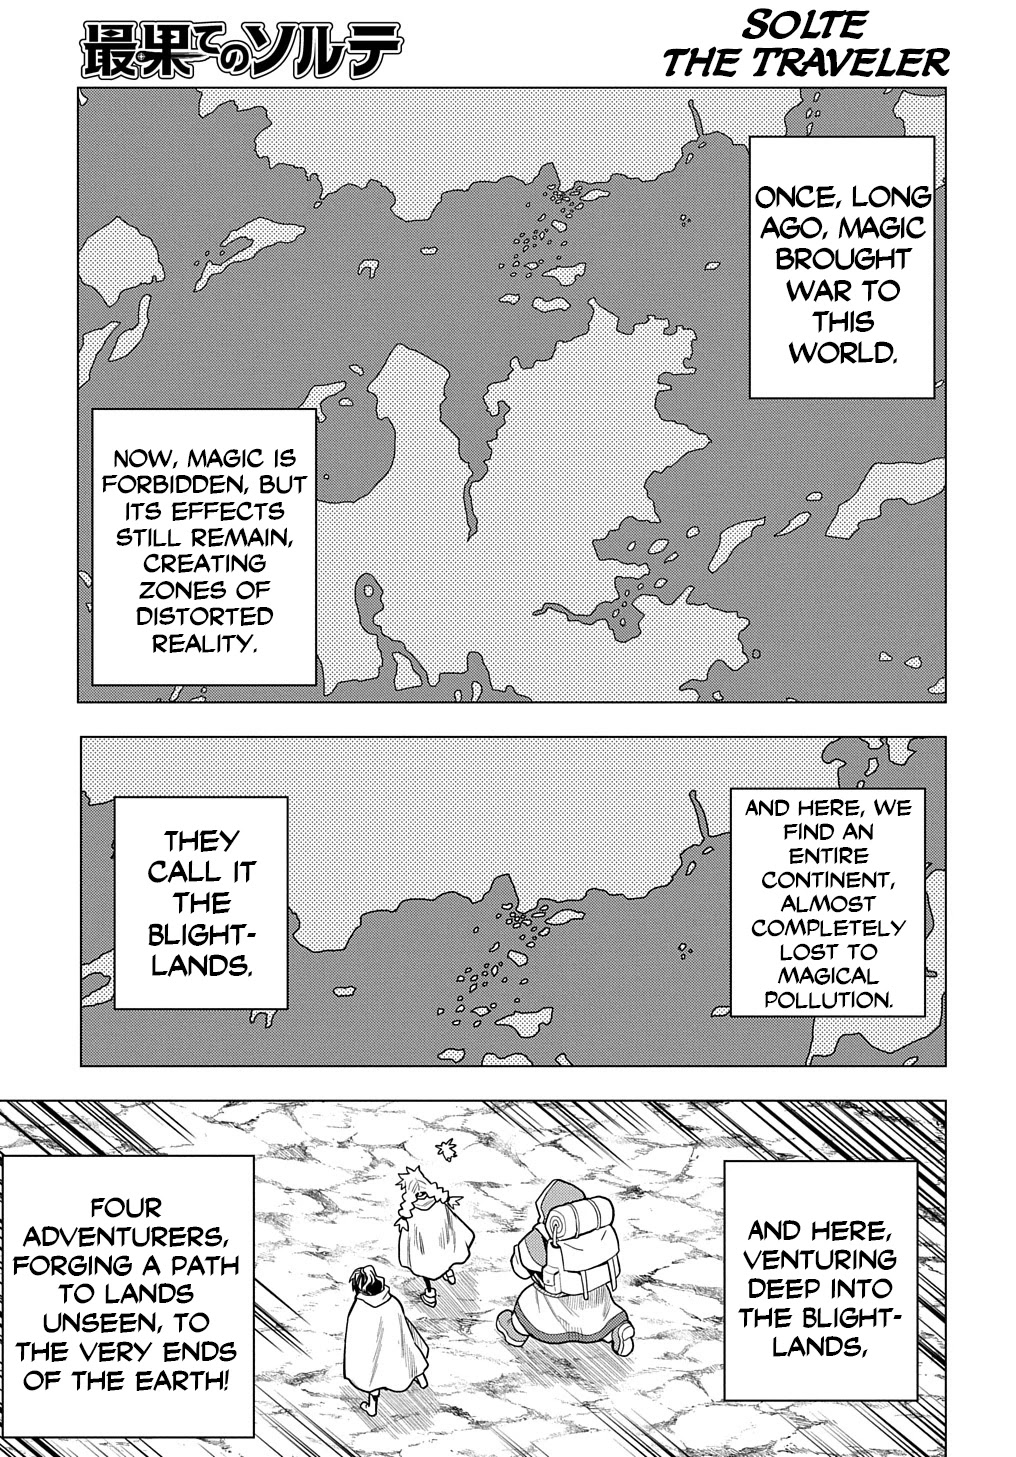 World End Solte - Page 2